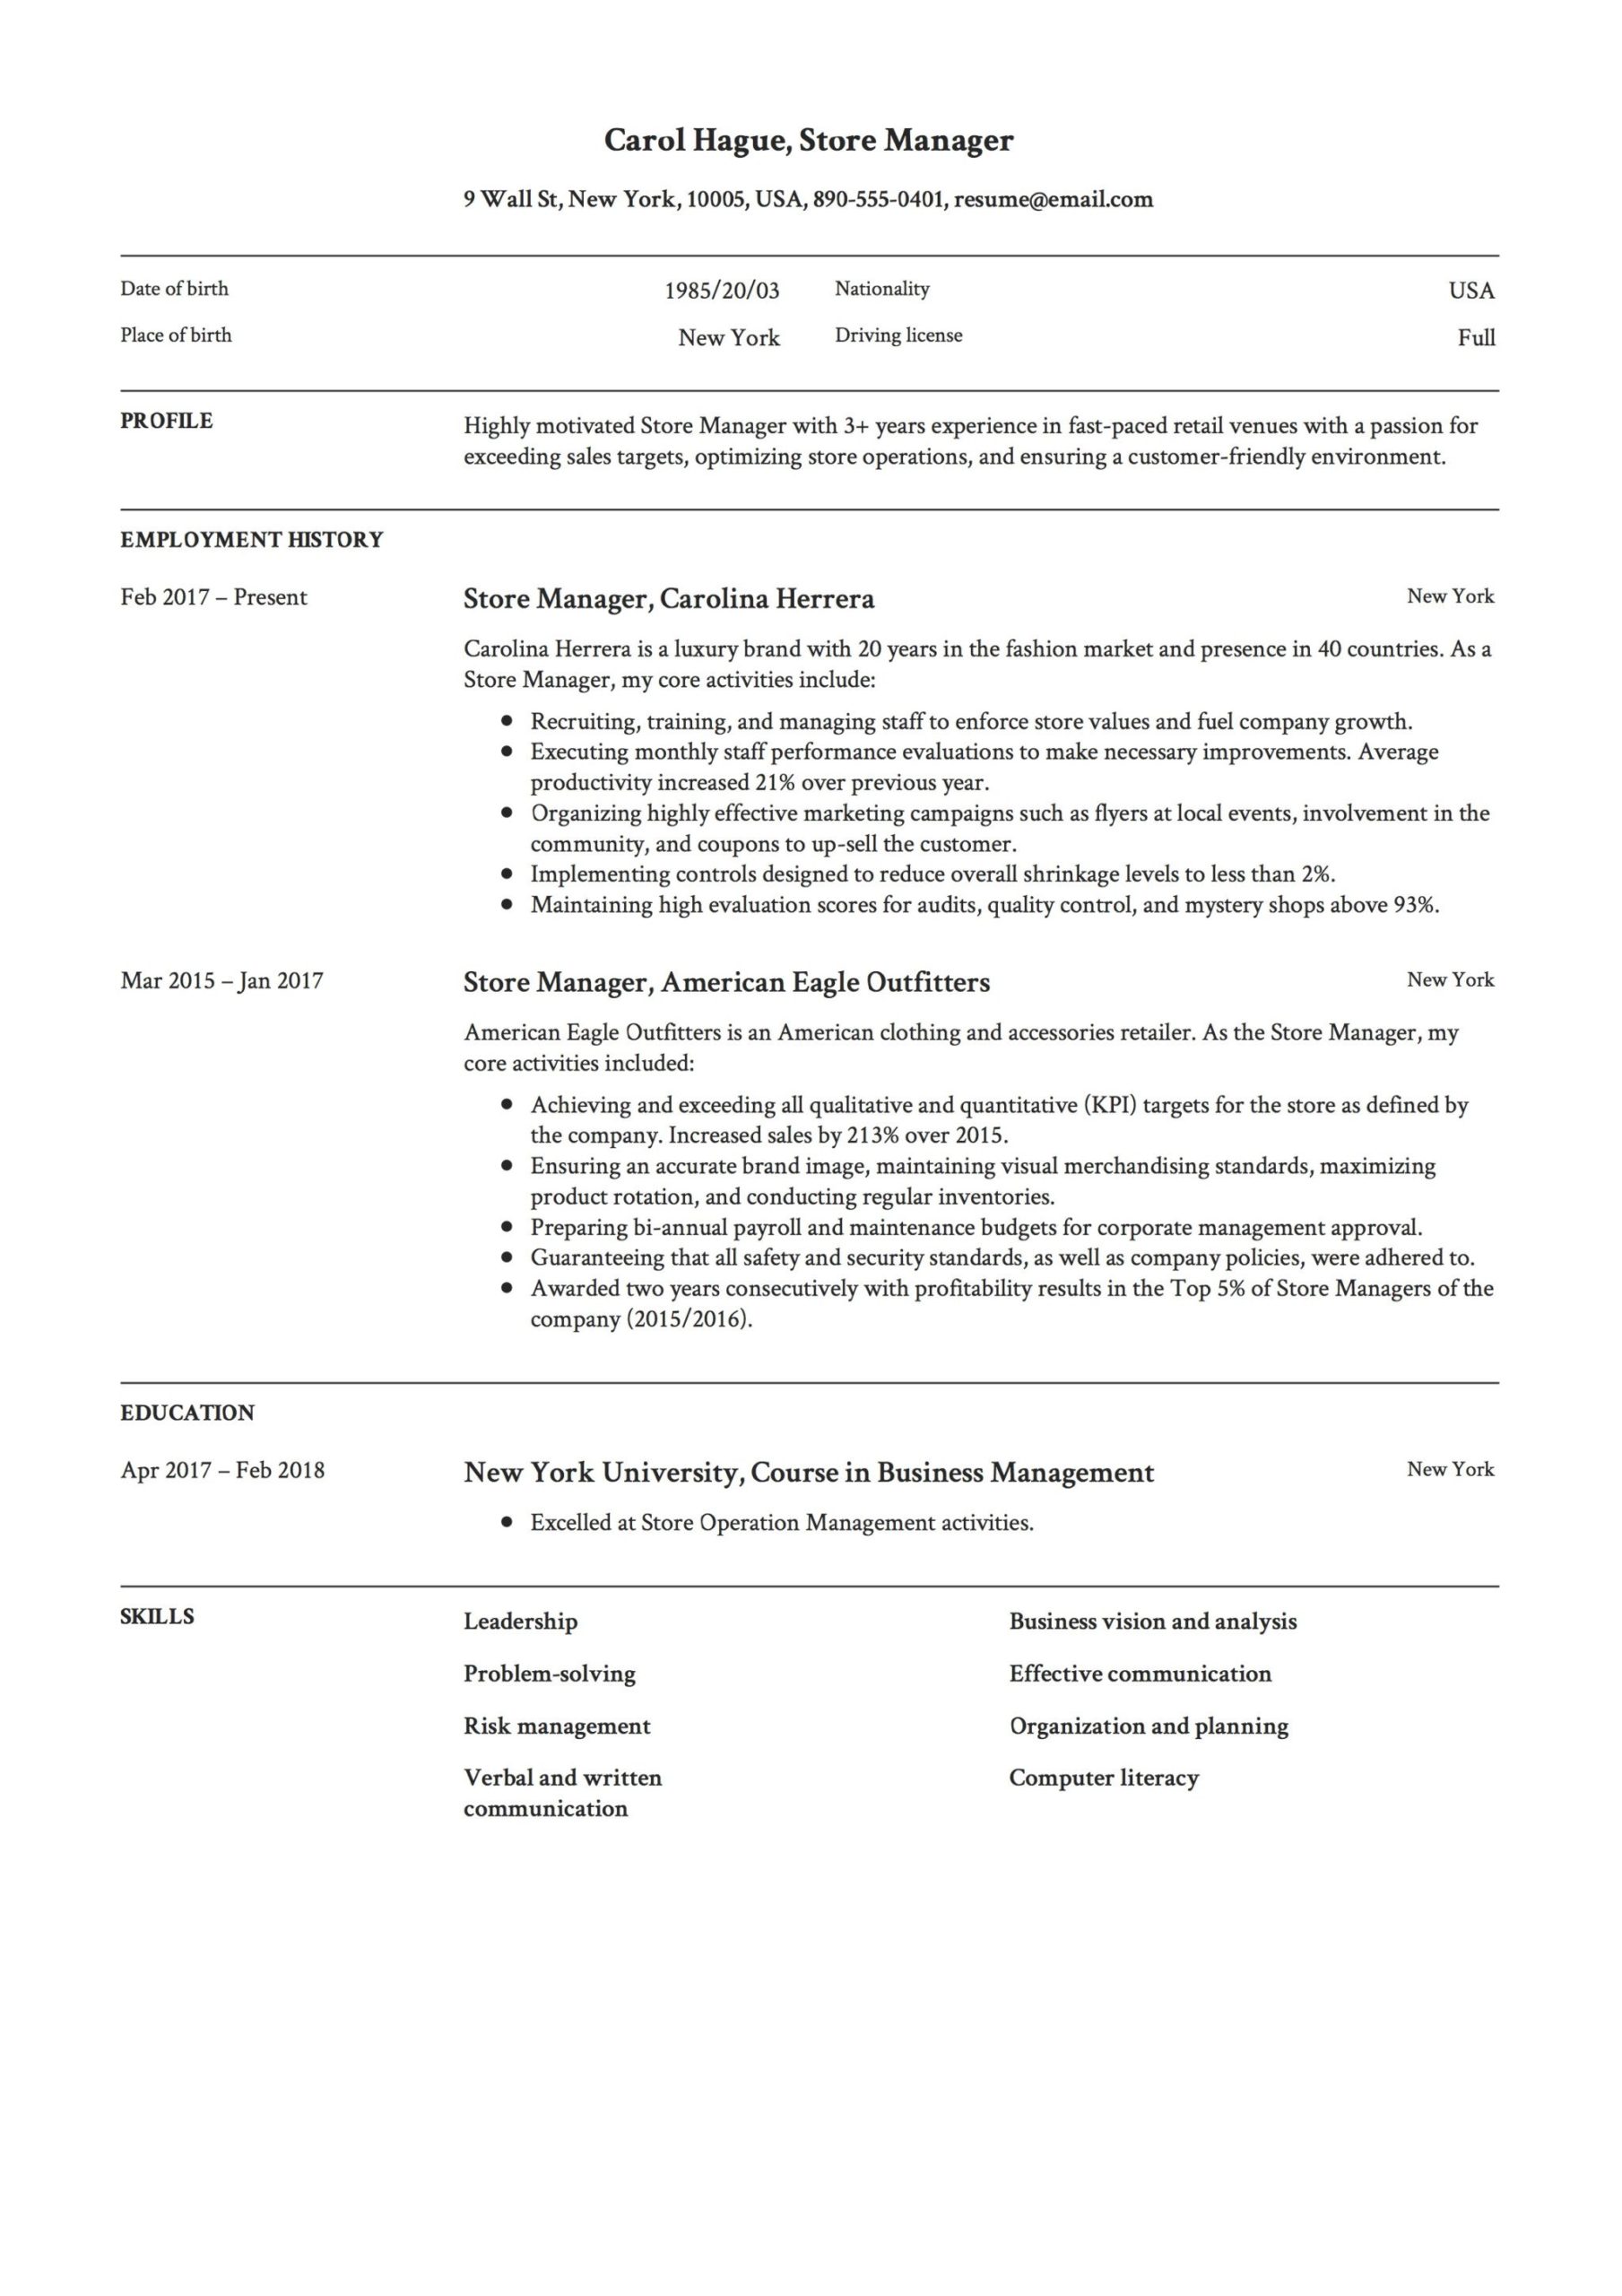 Sample Resume Functional for Retail Store Store Manager Resume & Guide 12 Templates Pdf 2021